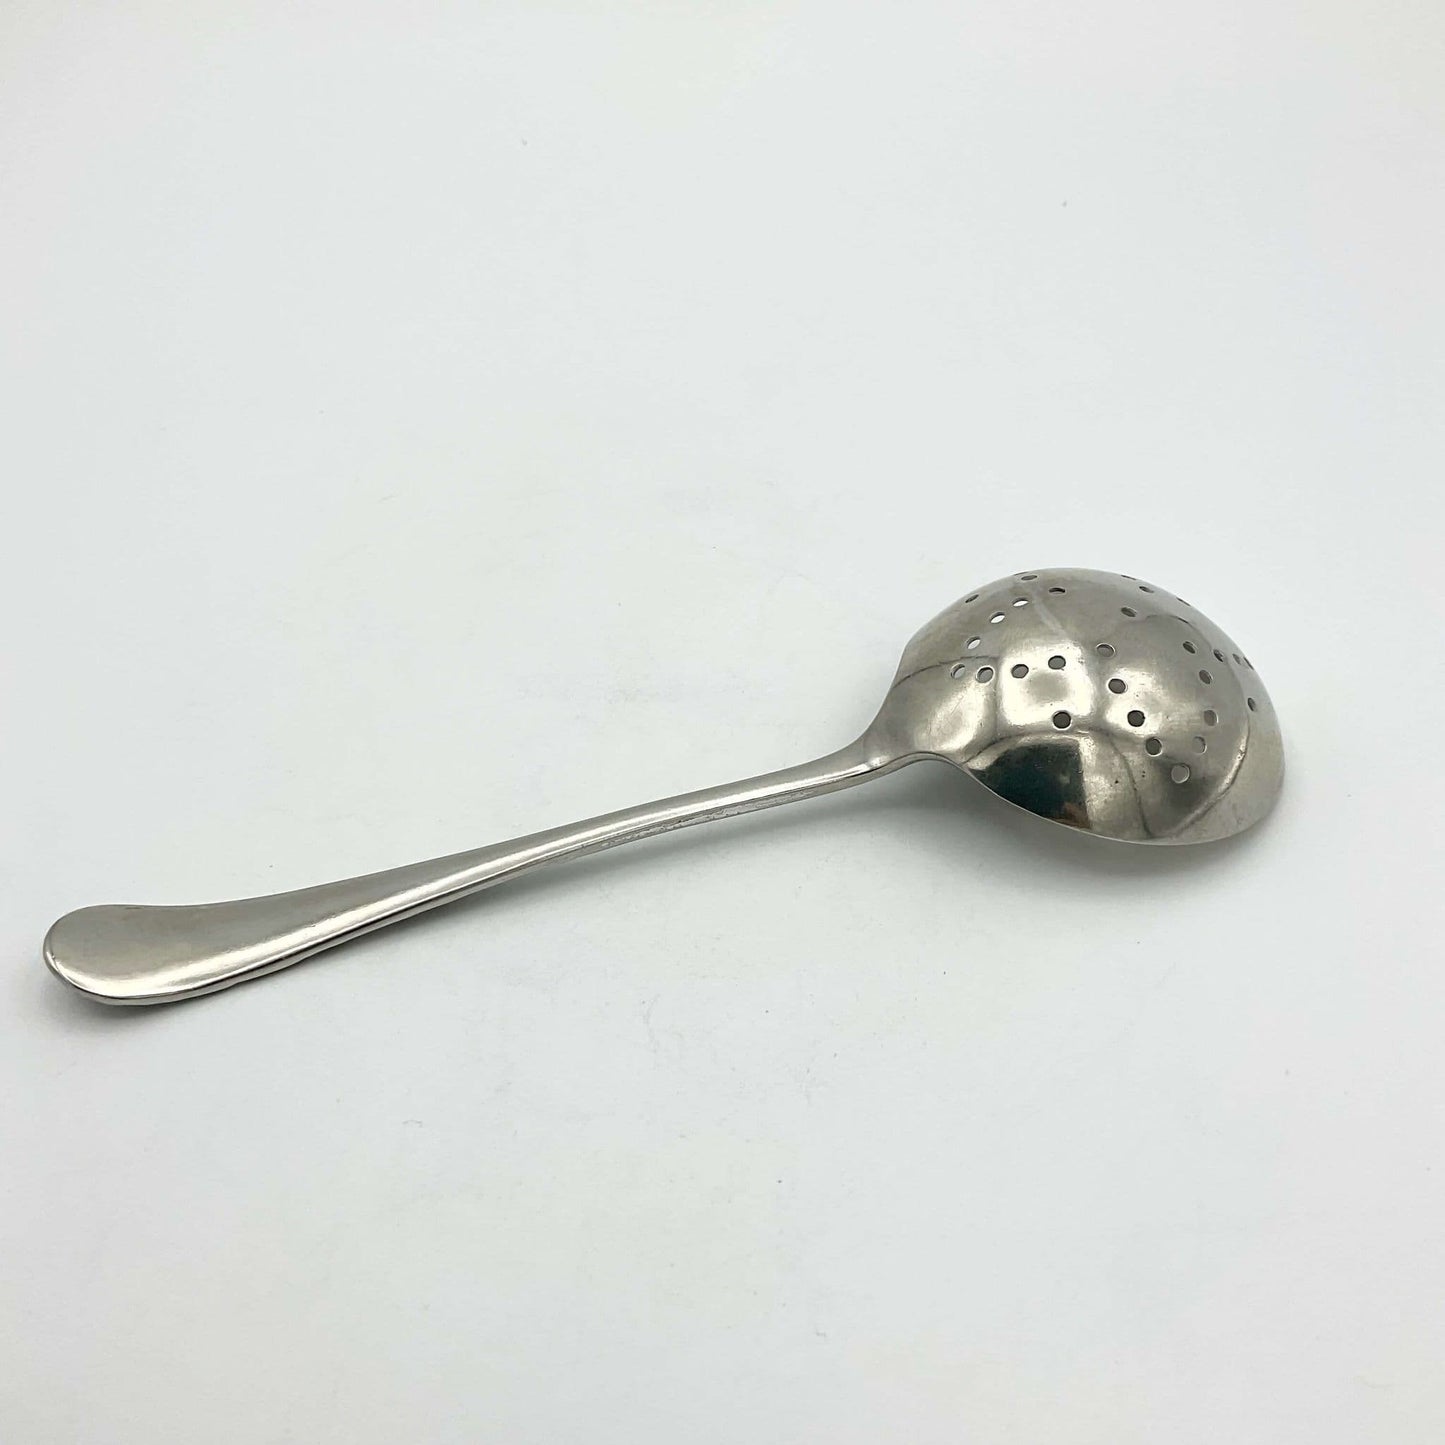 Antique Silver Plated Sugar Sifter Spoon, Cocoa Spoon